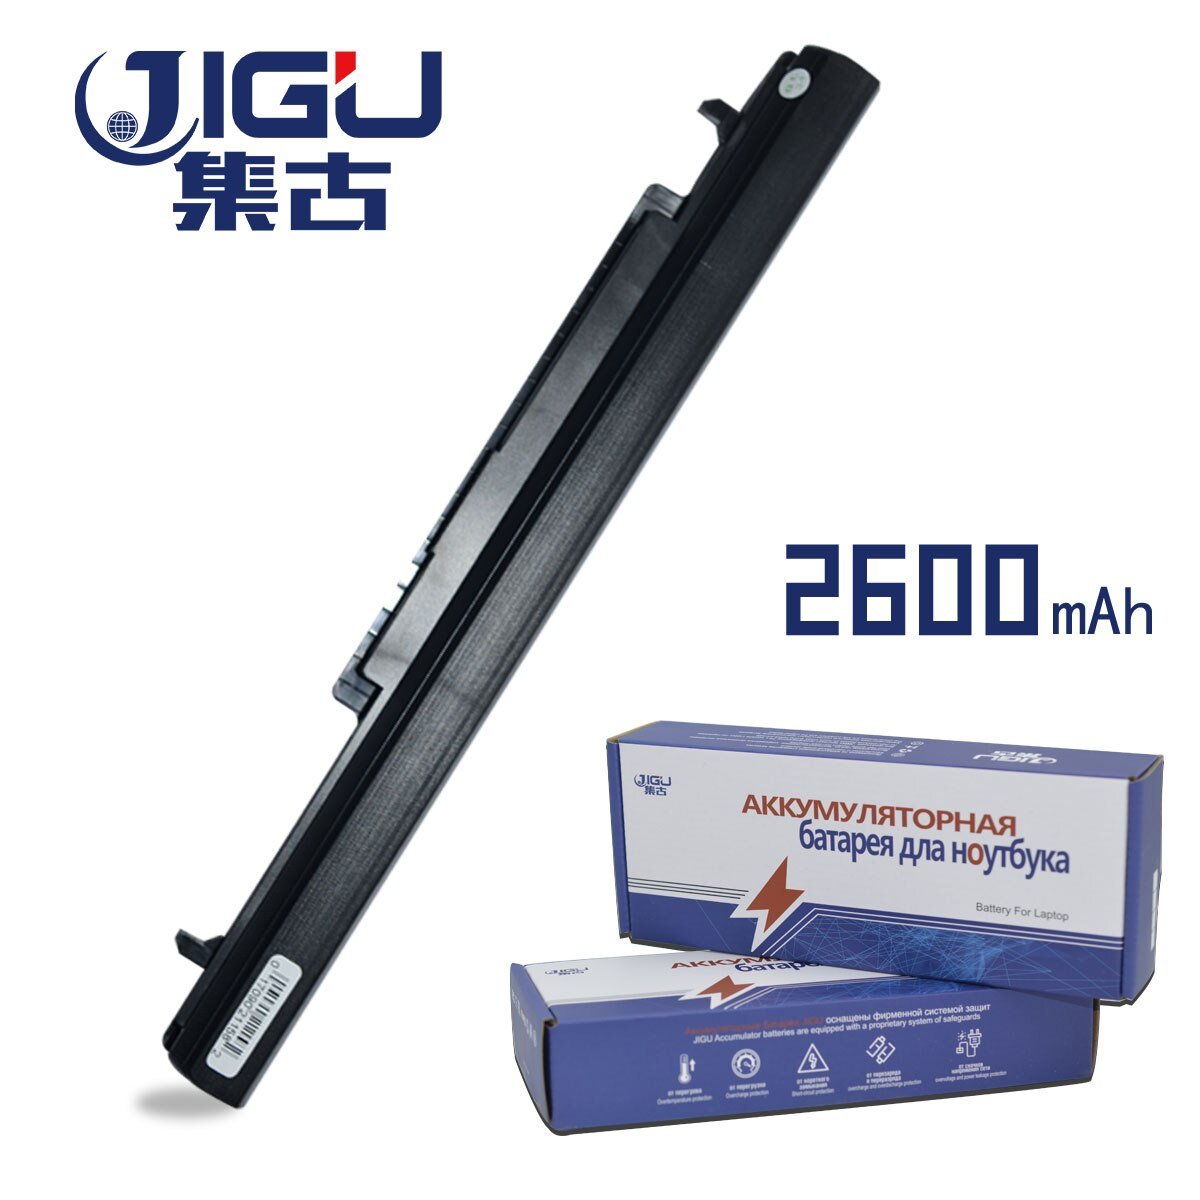 JIGU New Replacement 4Cell Laptop Battery For Asus A56 A46 K56 K46 S56 S46 Series Replace A42-K56 A32-K56 A41-K56 A31-K56 Series GreatEagleInc